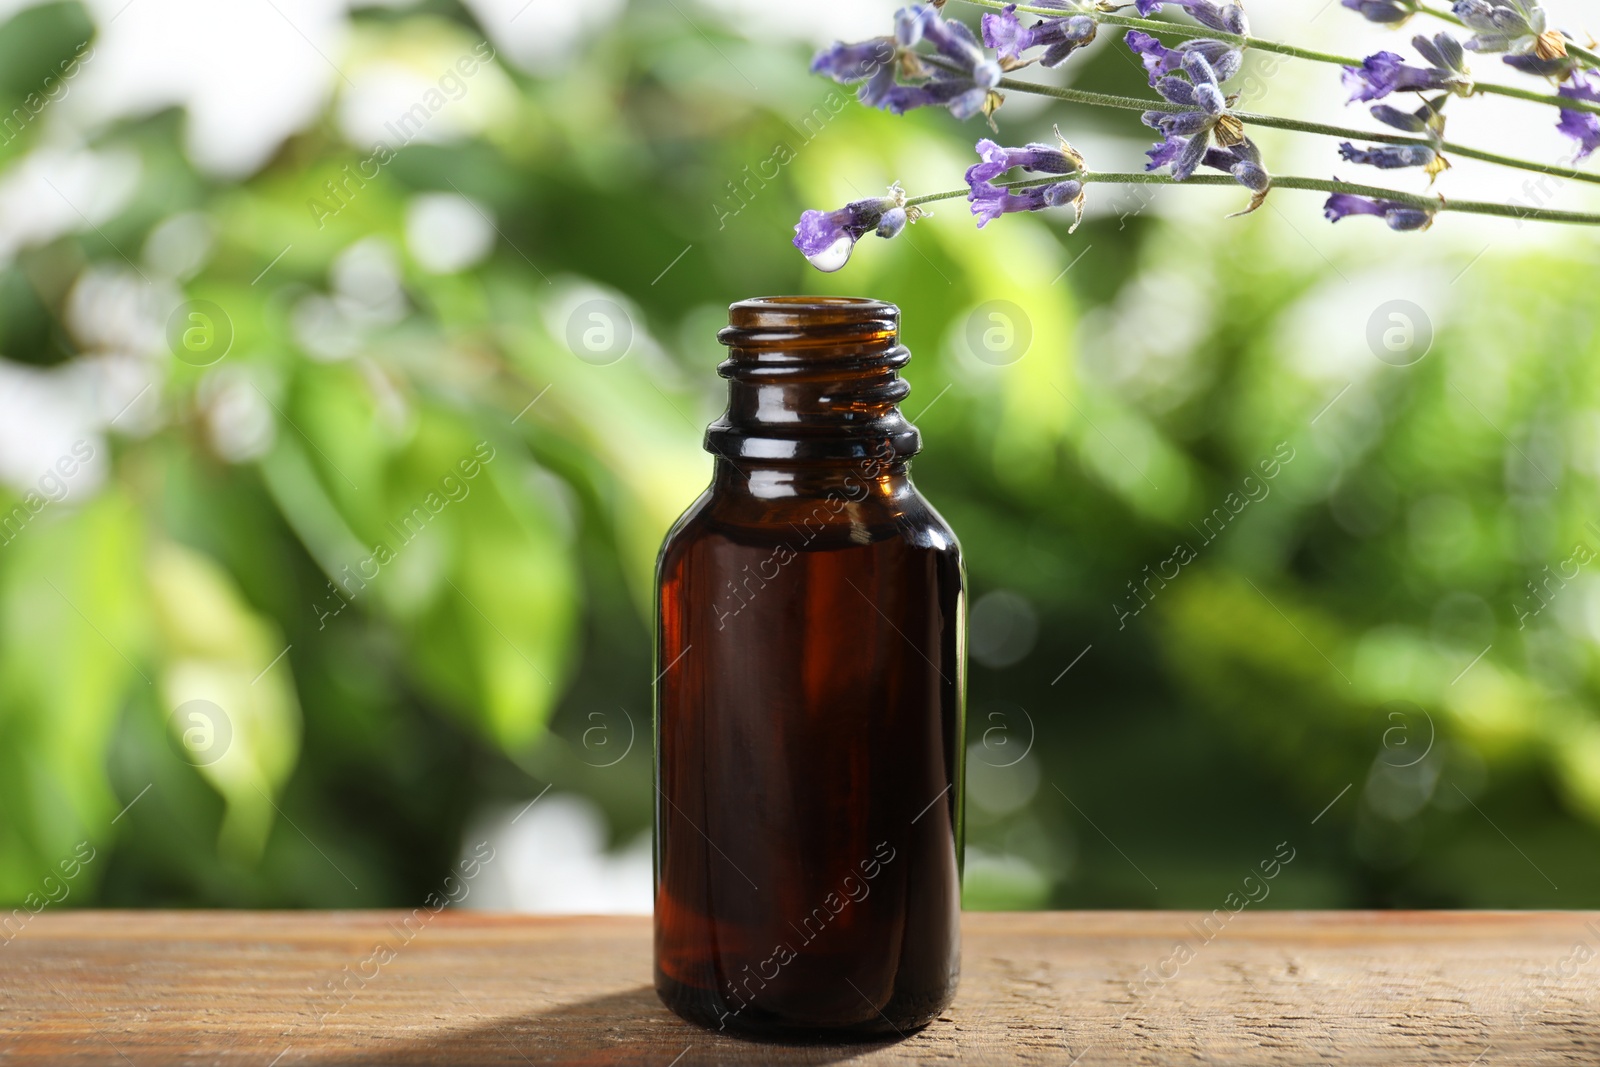 Photo of Bottle of lavender essential oil on wooden table against blurred background